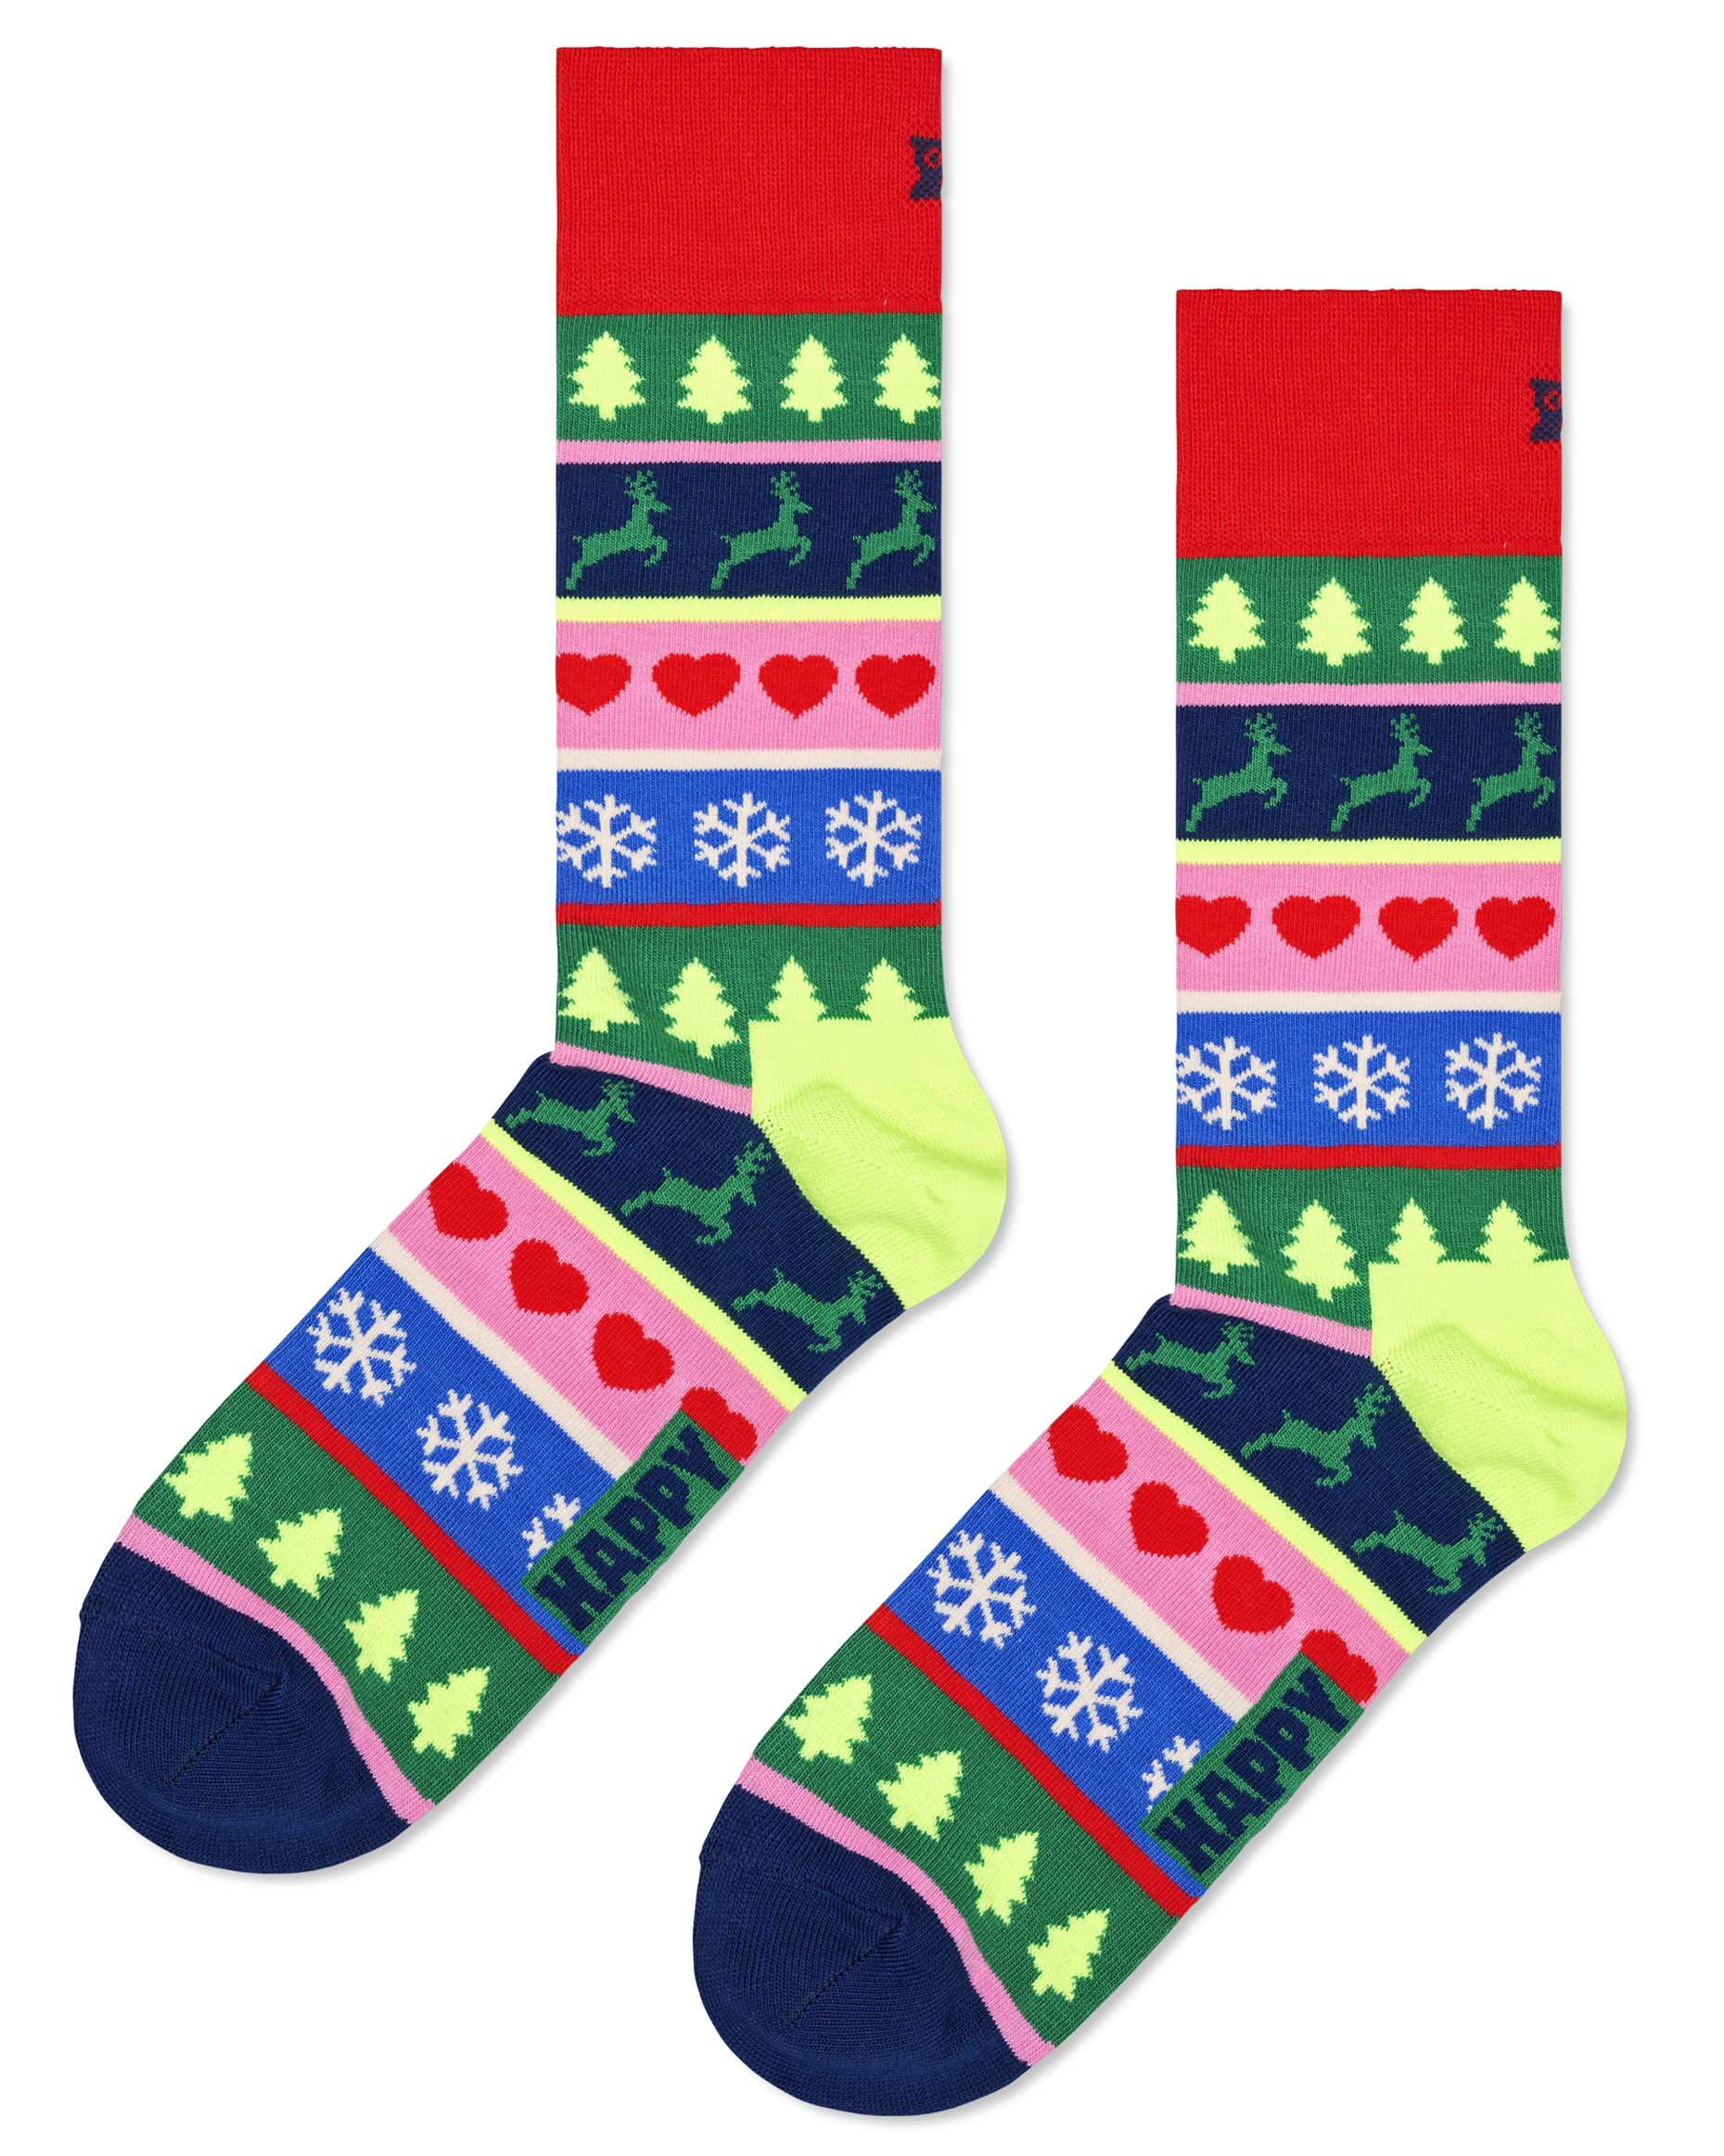 Happy Sock P000265 Christmas Stripe Sock - colourful novelty Xmas socks with snowflakes, reindeer, hearts and Xmas trees.